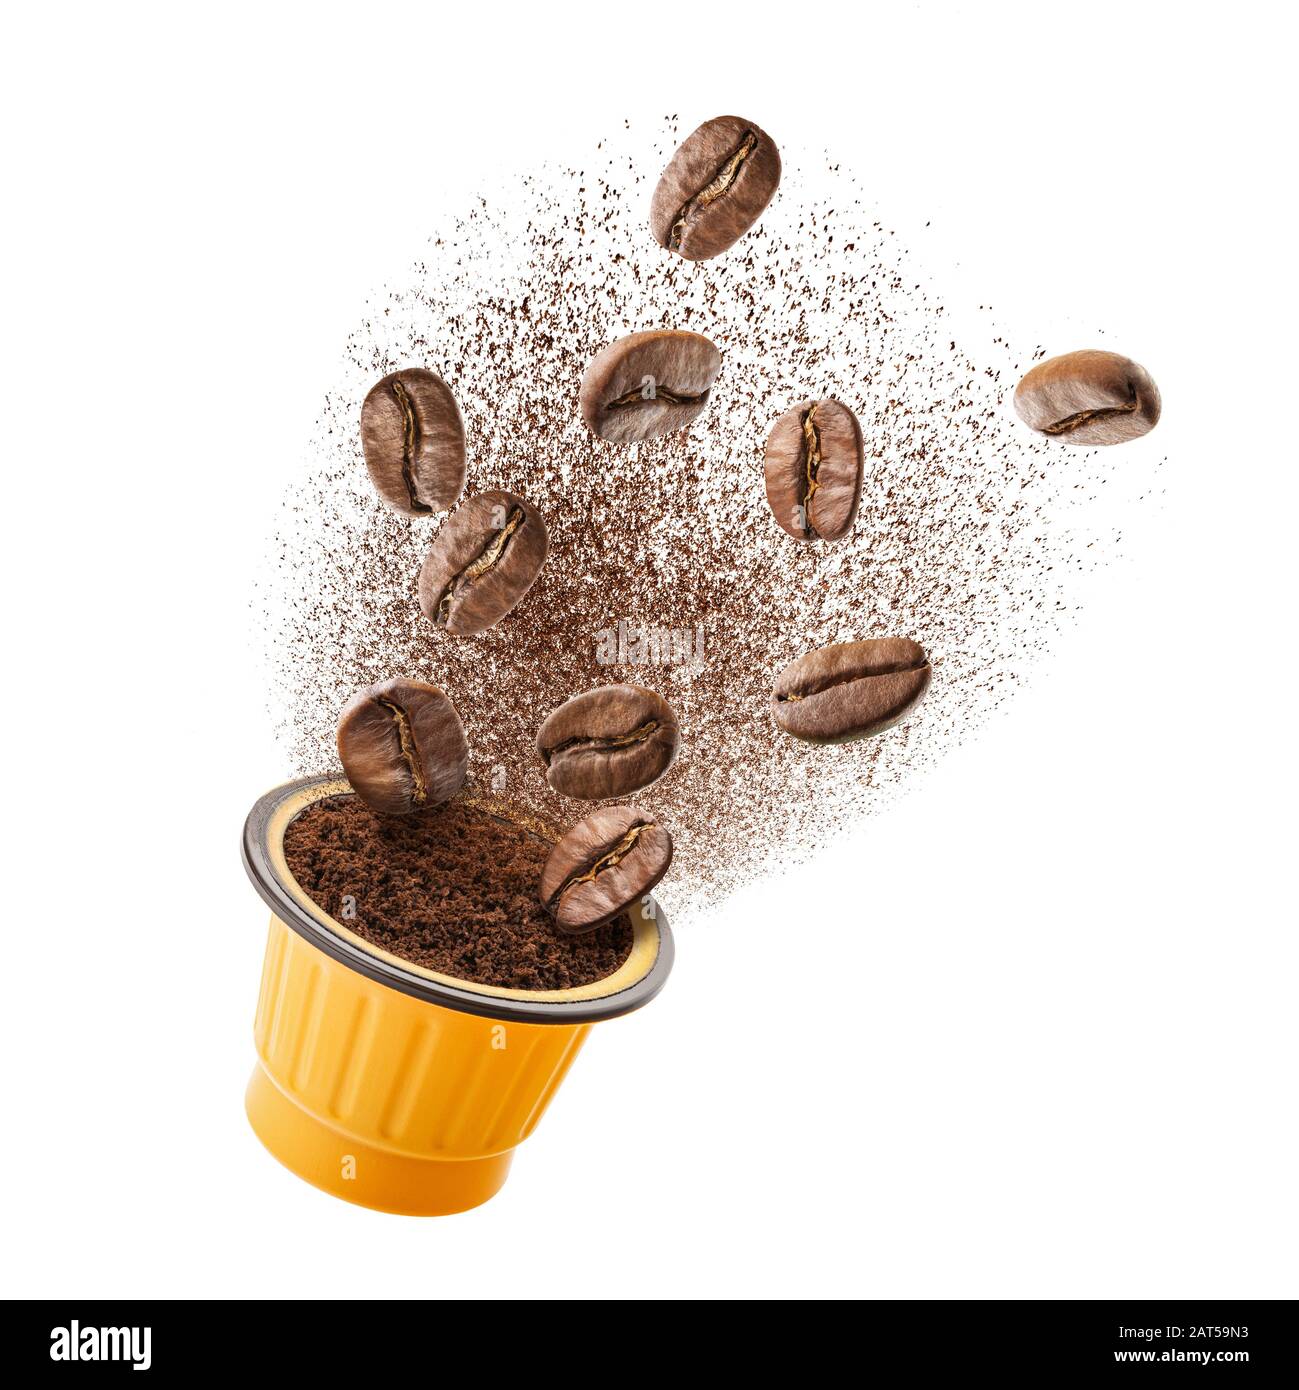 Exploded view of coffee grinder with roasted beans and leaves Stock Photo